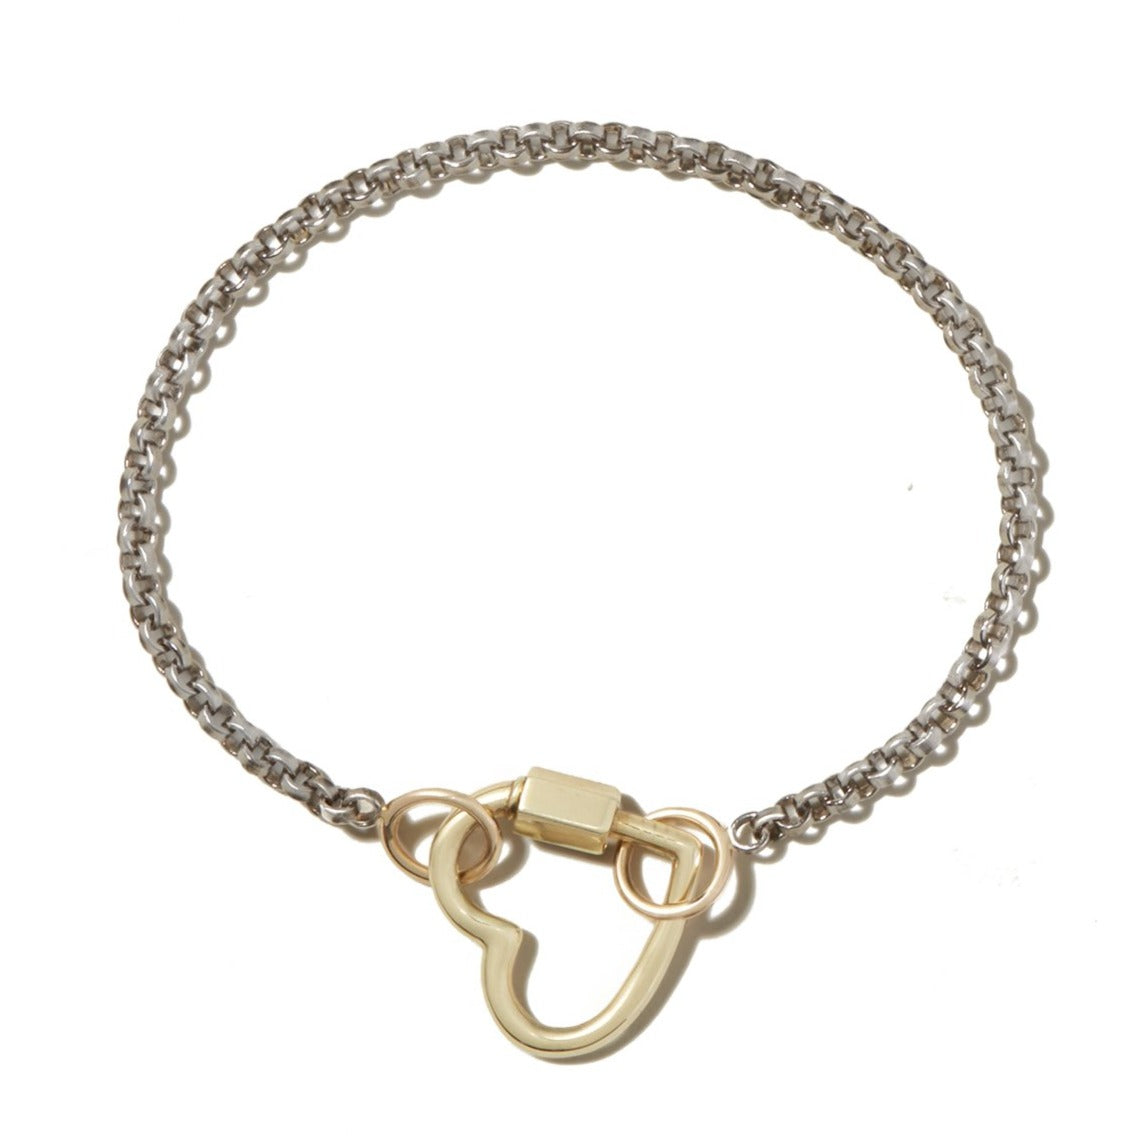 Rolo chain silver bracelet with heart lock charm